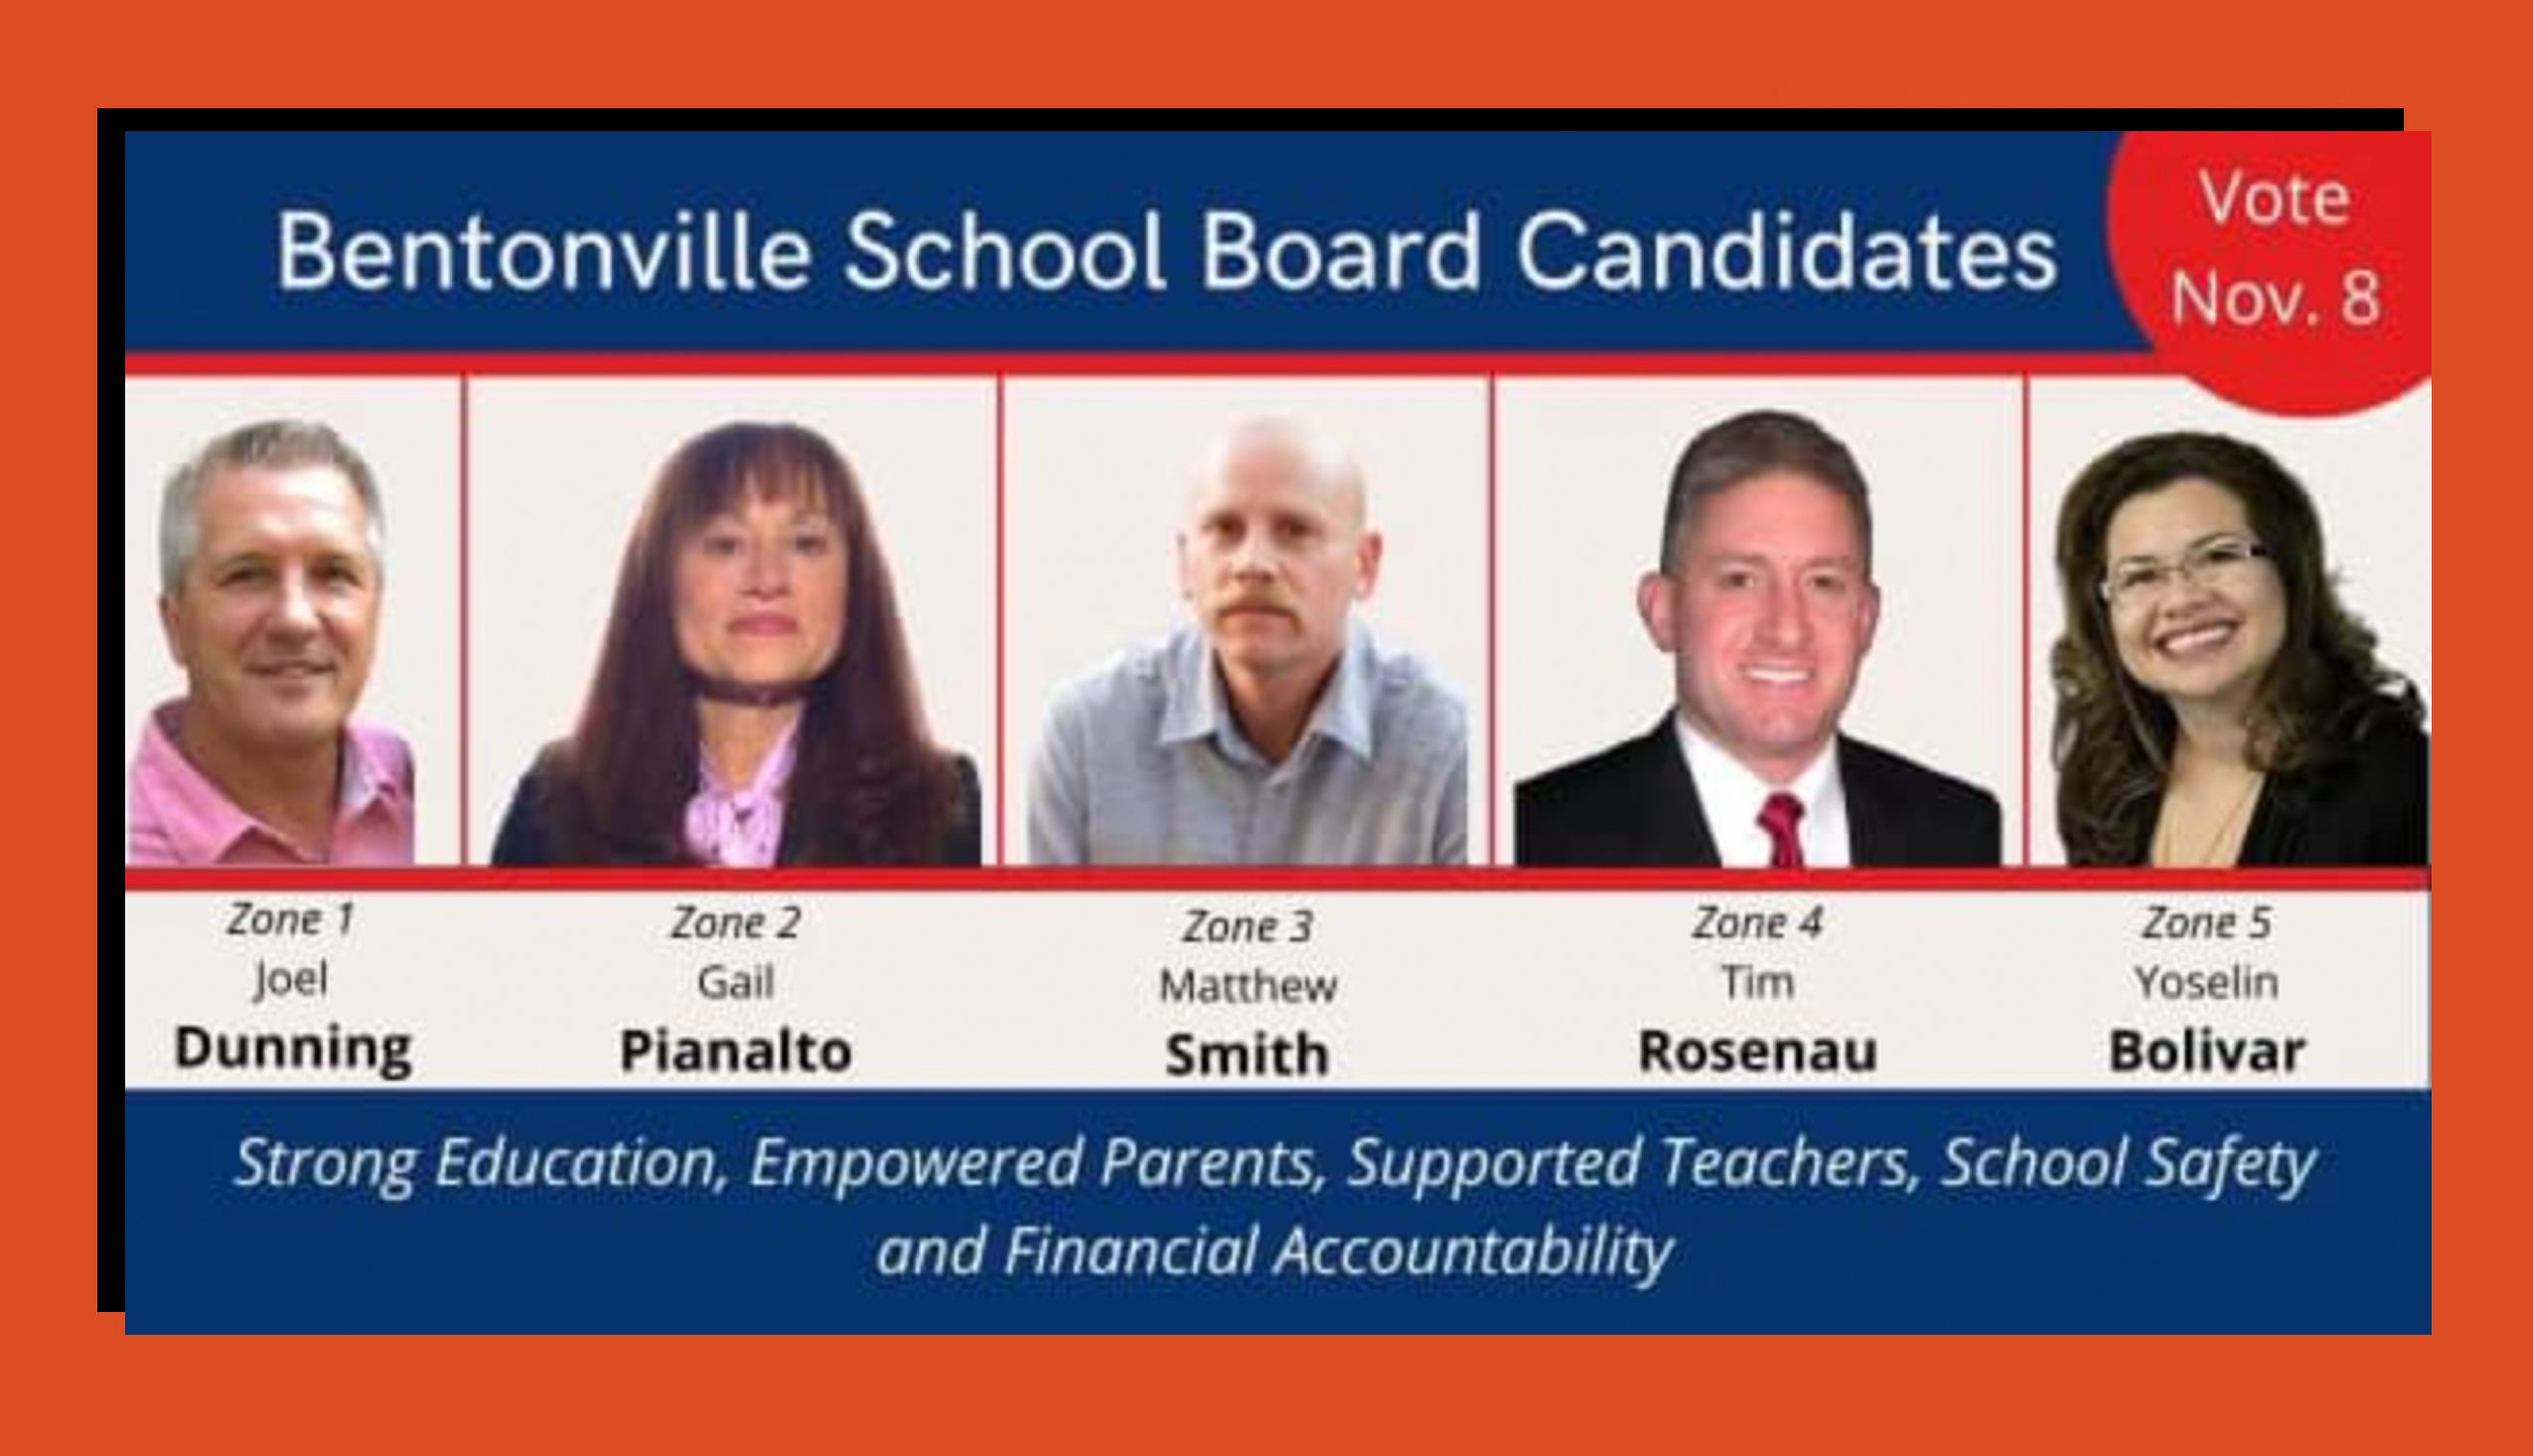 Extremist Group pushes Bentonville school board candidates 